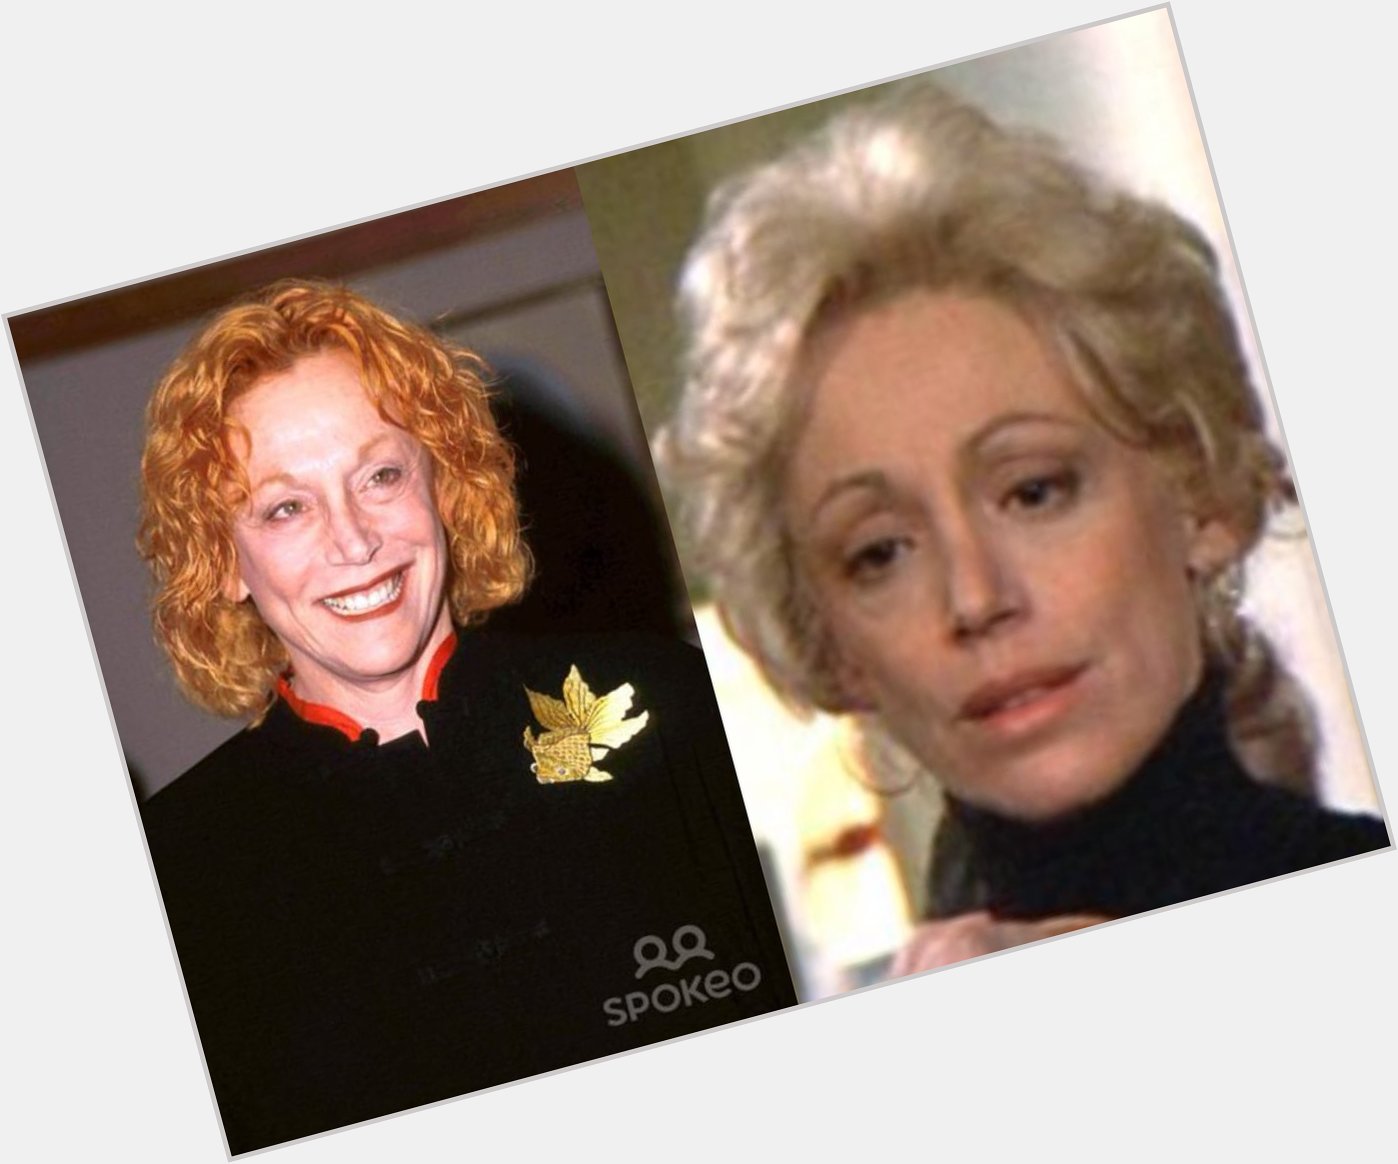 Happy 83rd Birthday to Lorraine Gary! The actress who played Ellen Brody in the Jaws movies. 